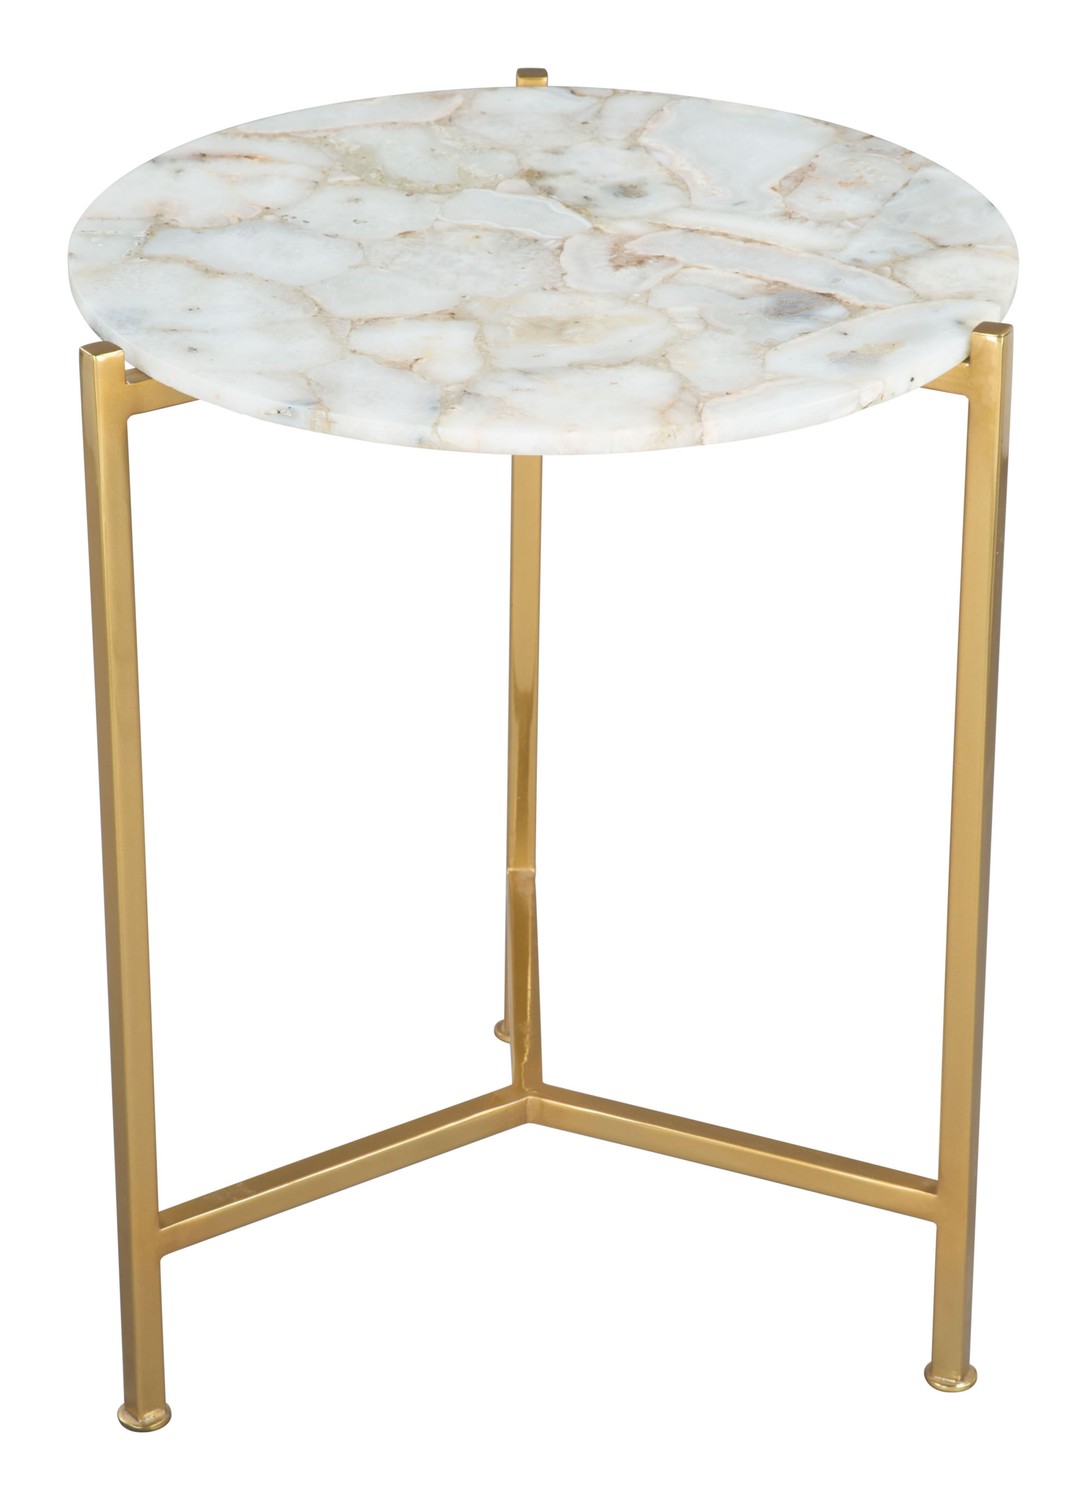 17.3" x 17.3" x 20" Agate and Gold Agate Iron Side Table